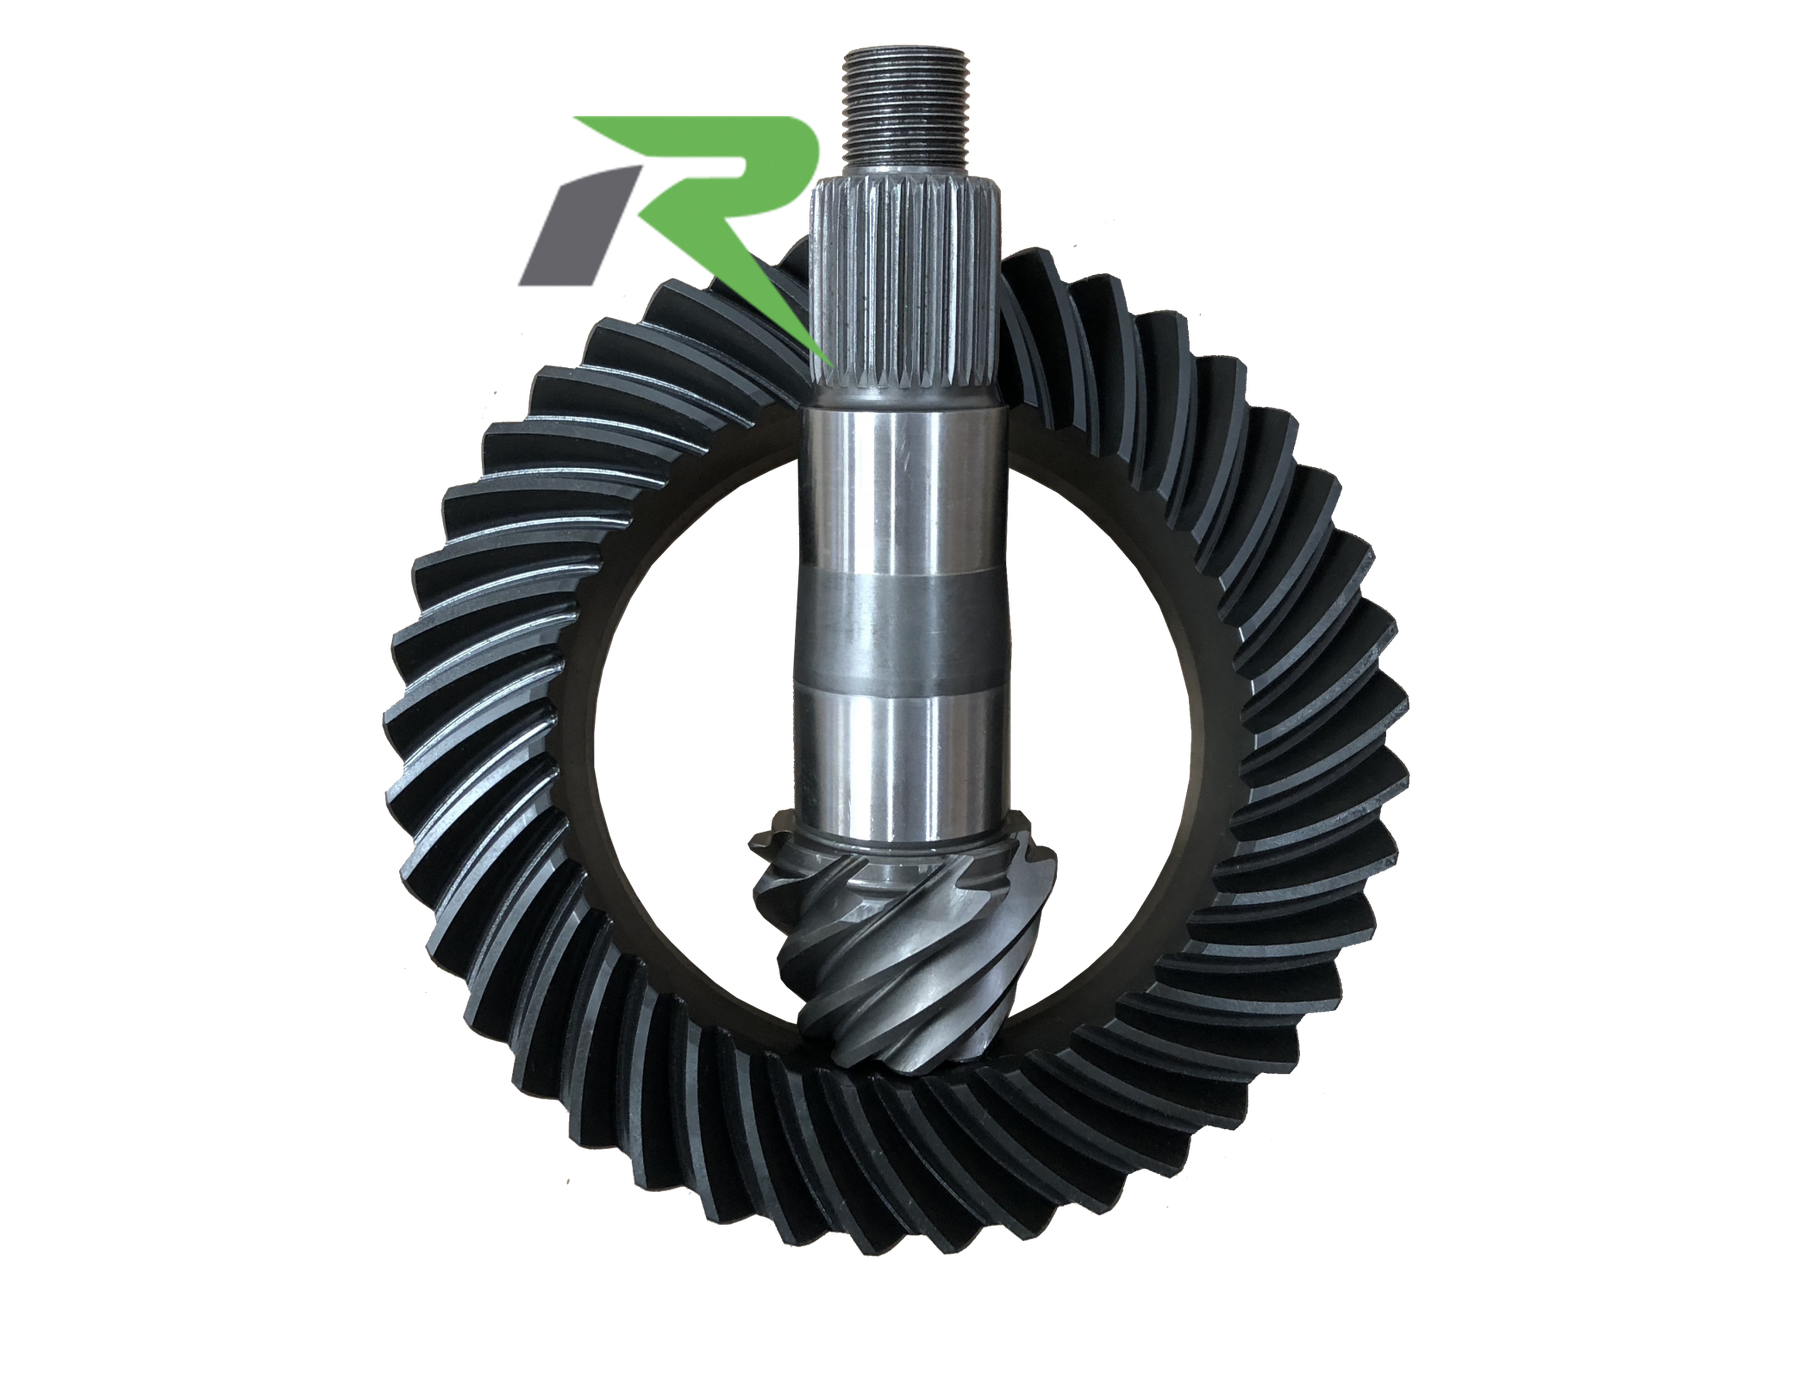 Revolution Gear & Axle Front Ring And Pinion, Dana 44 210Mm Reverse, 5.38 Ratio, 12 Bolt For